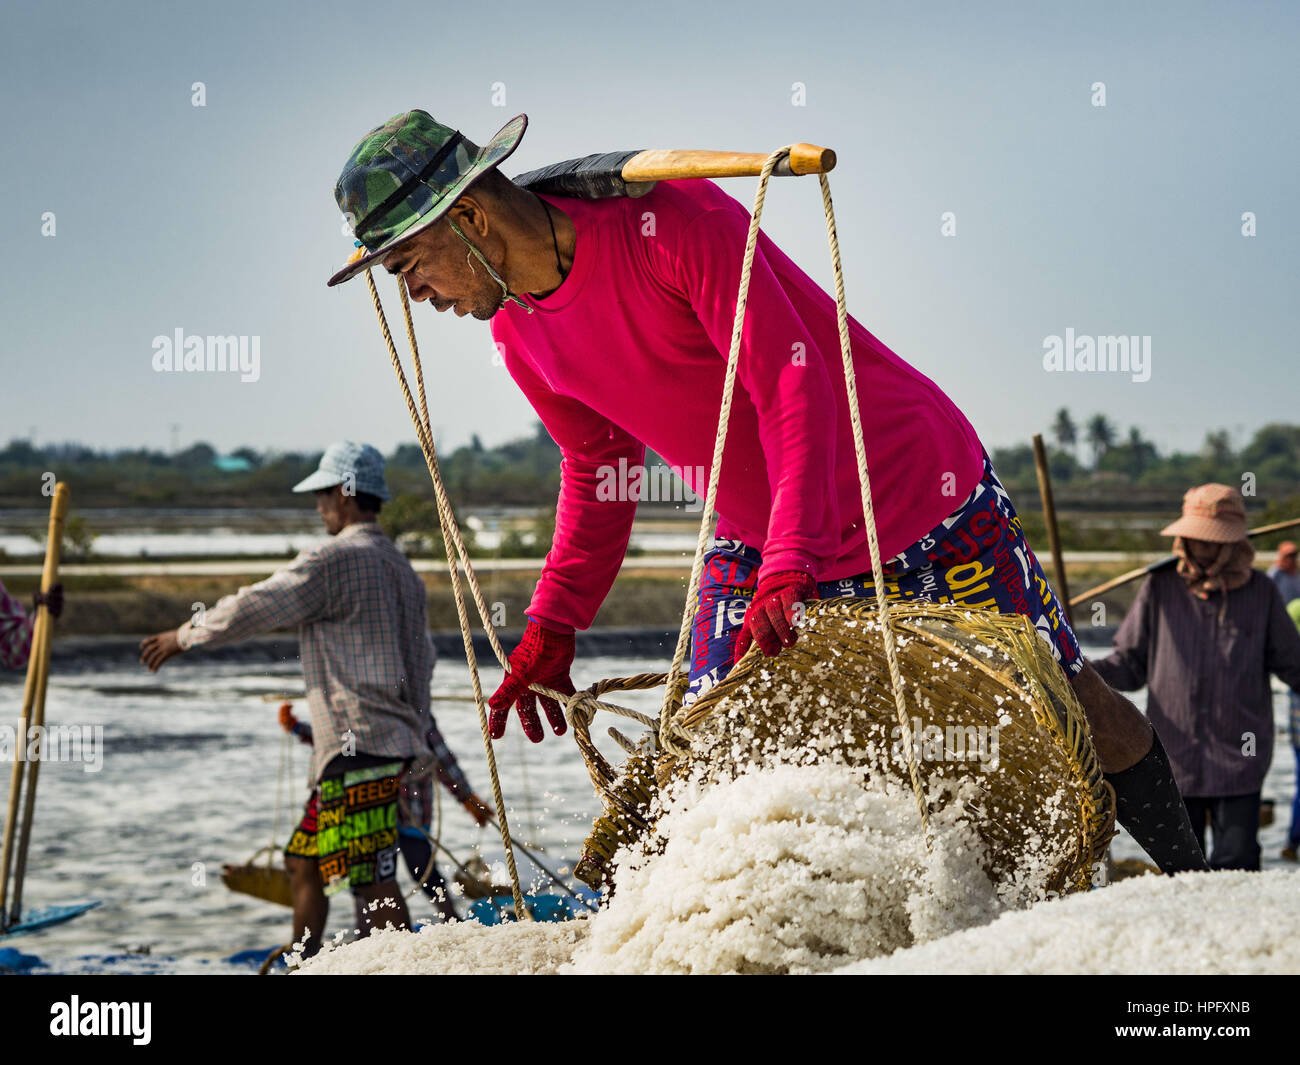 Bang Kaeo, Petchaburi, Thailand. 22nd Feb, 2017. A worker unloads baskets of salt during the salt harvest in Petchaburi province of Thailand, about two hours south of Bangkok on the Gulf of Siam. Salt is collected in coastal flats that are flooded with sea water. The water evaporates and leaves the salt in large pans. Coastal provinces south of Bangkok used to be dotted with salt farms, but industrial development has pushed the salt farms down to remote parts of Petchaburi province. The harvest normally starts in early February and lasts until early May, but this year's harvest was delaye Stock Photo